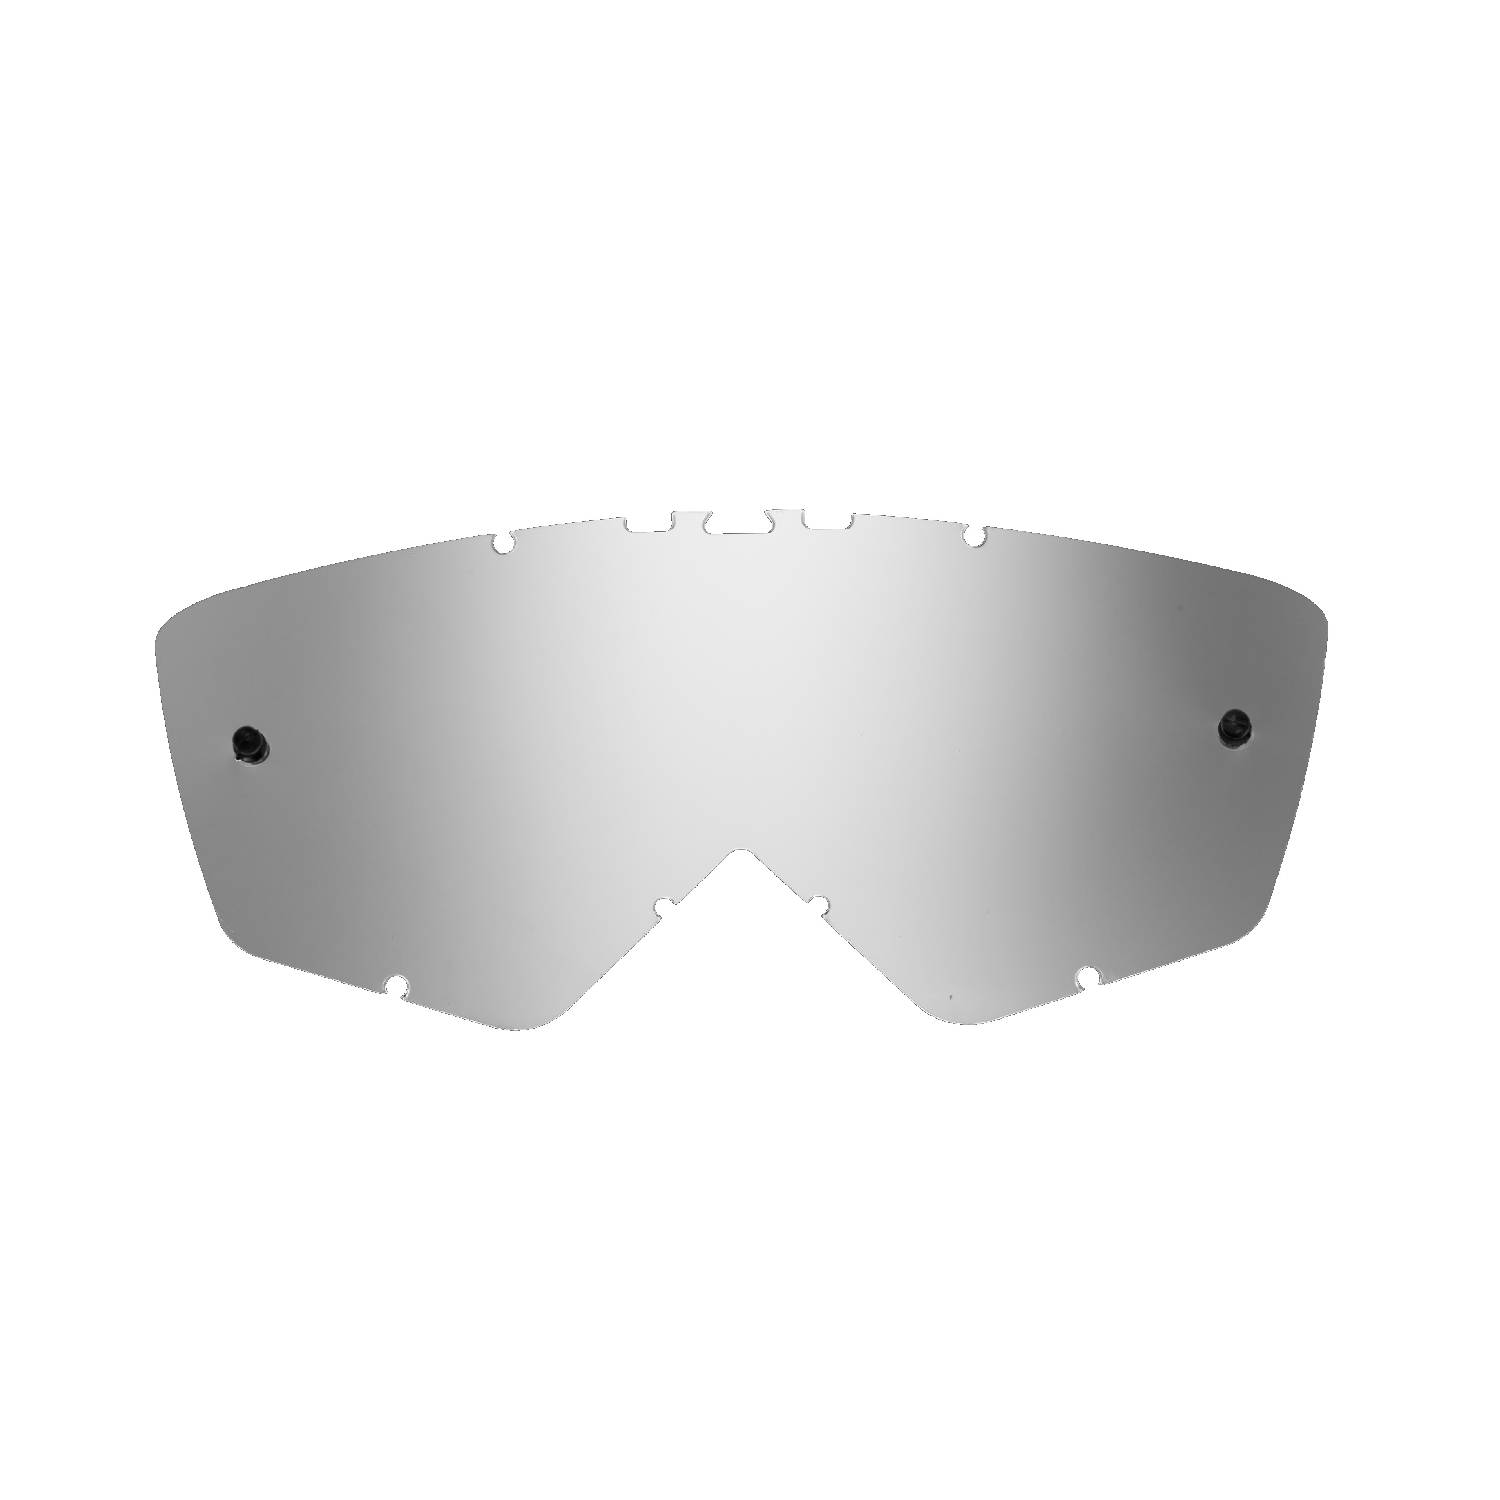 silver-toned mirrored replacement lenses for goggles compatible for Ariete Andrenaline RC07 / Ride And Roll goggle